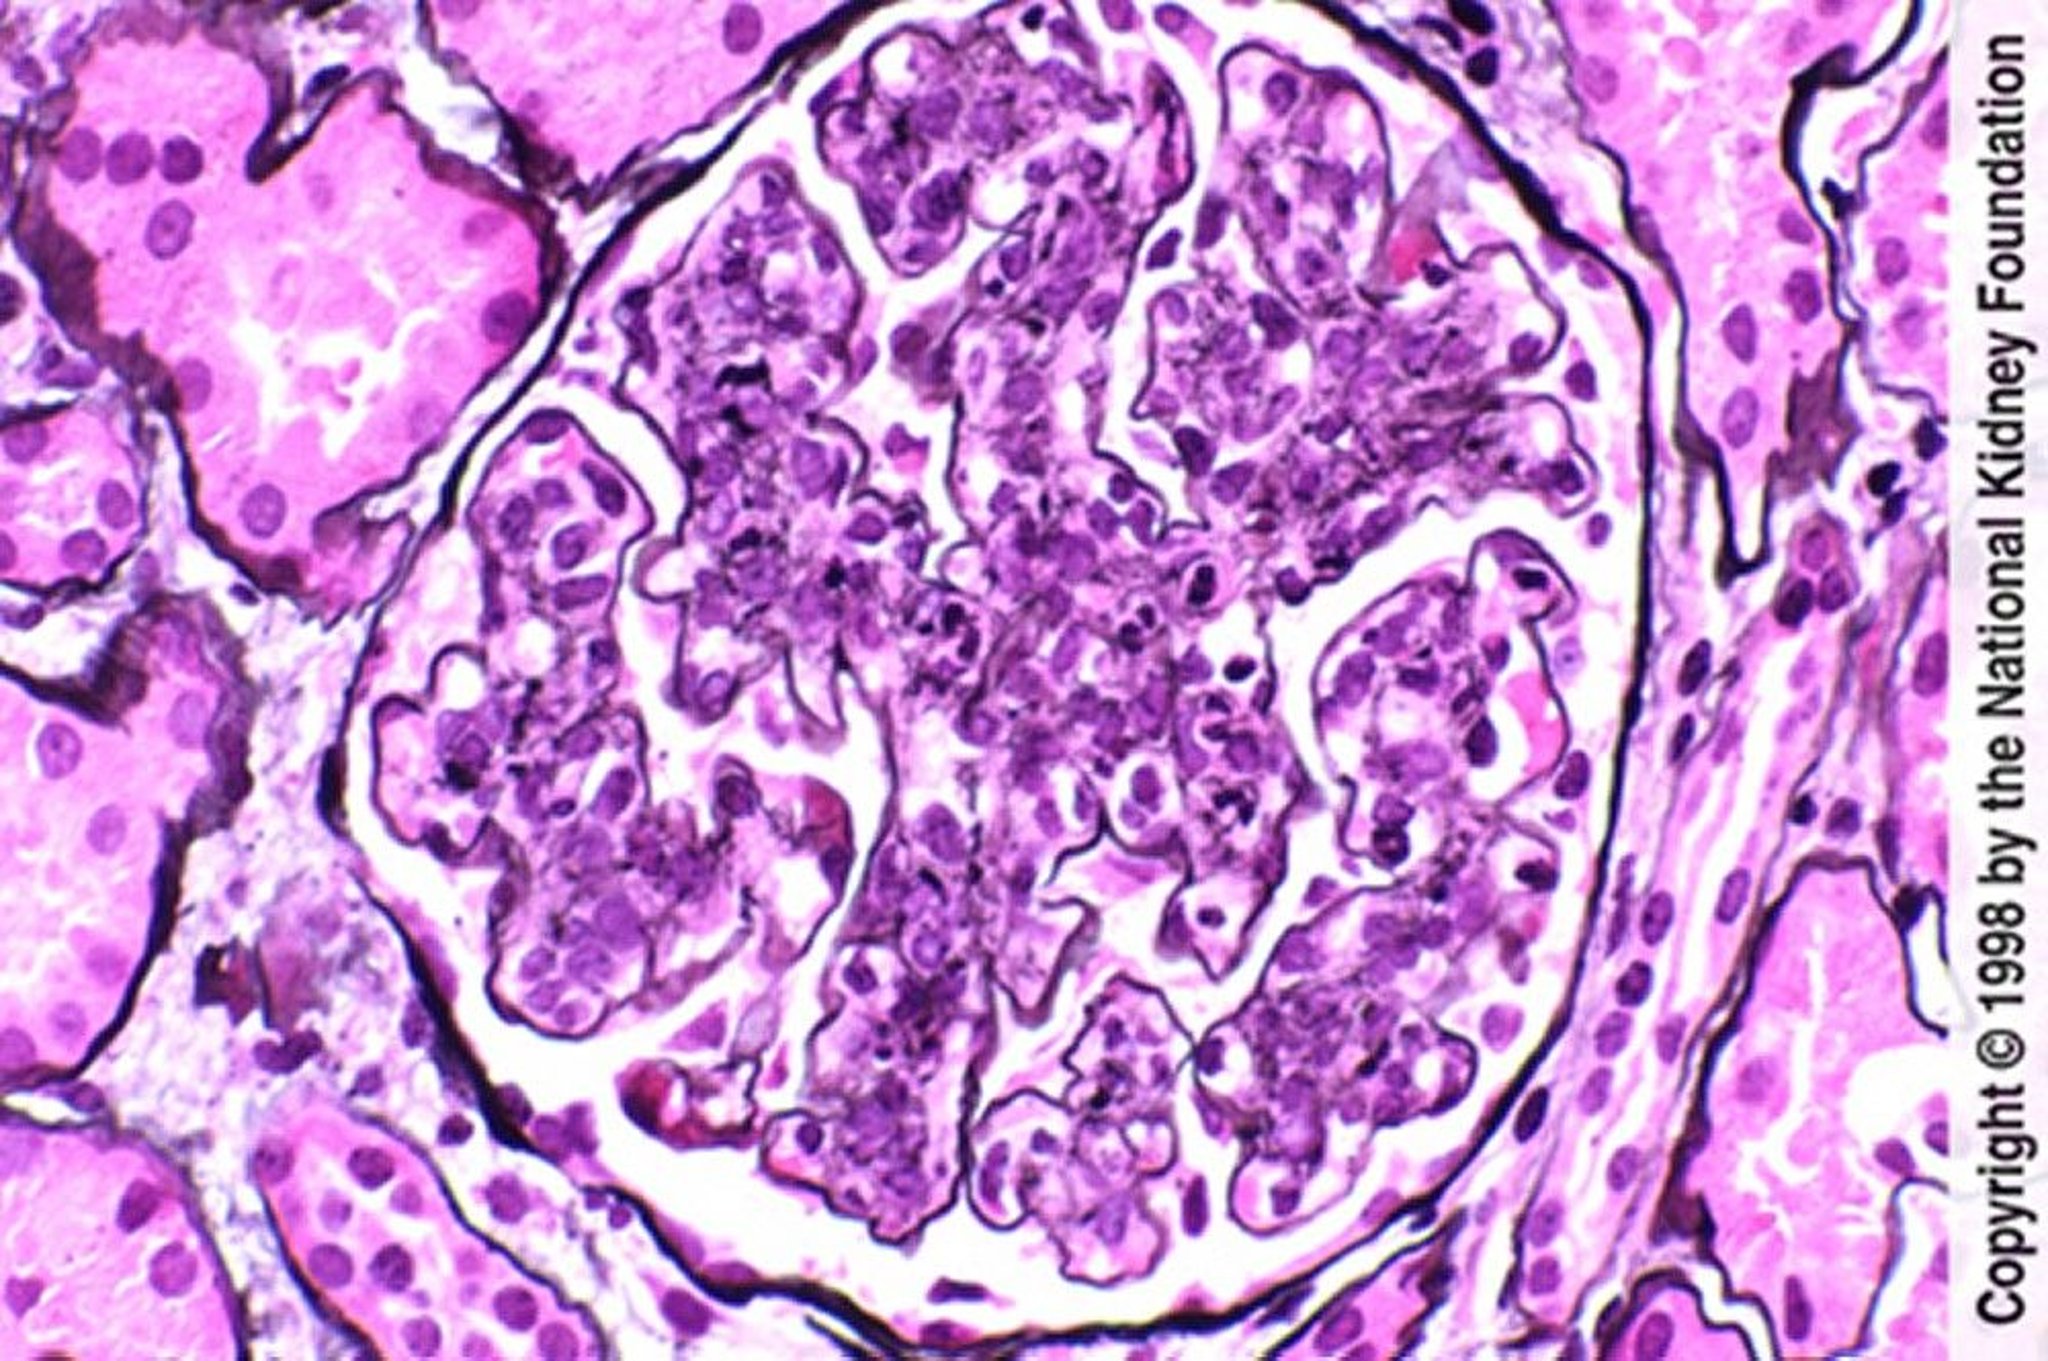 Postinfectious Glomerulonephritis (Hypercellularity With Neutrophilic Infiltration)